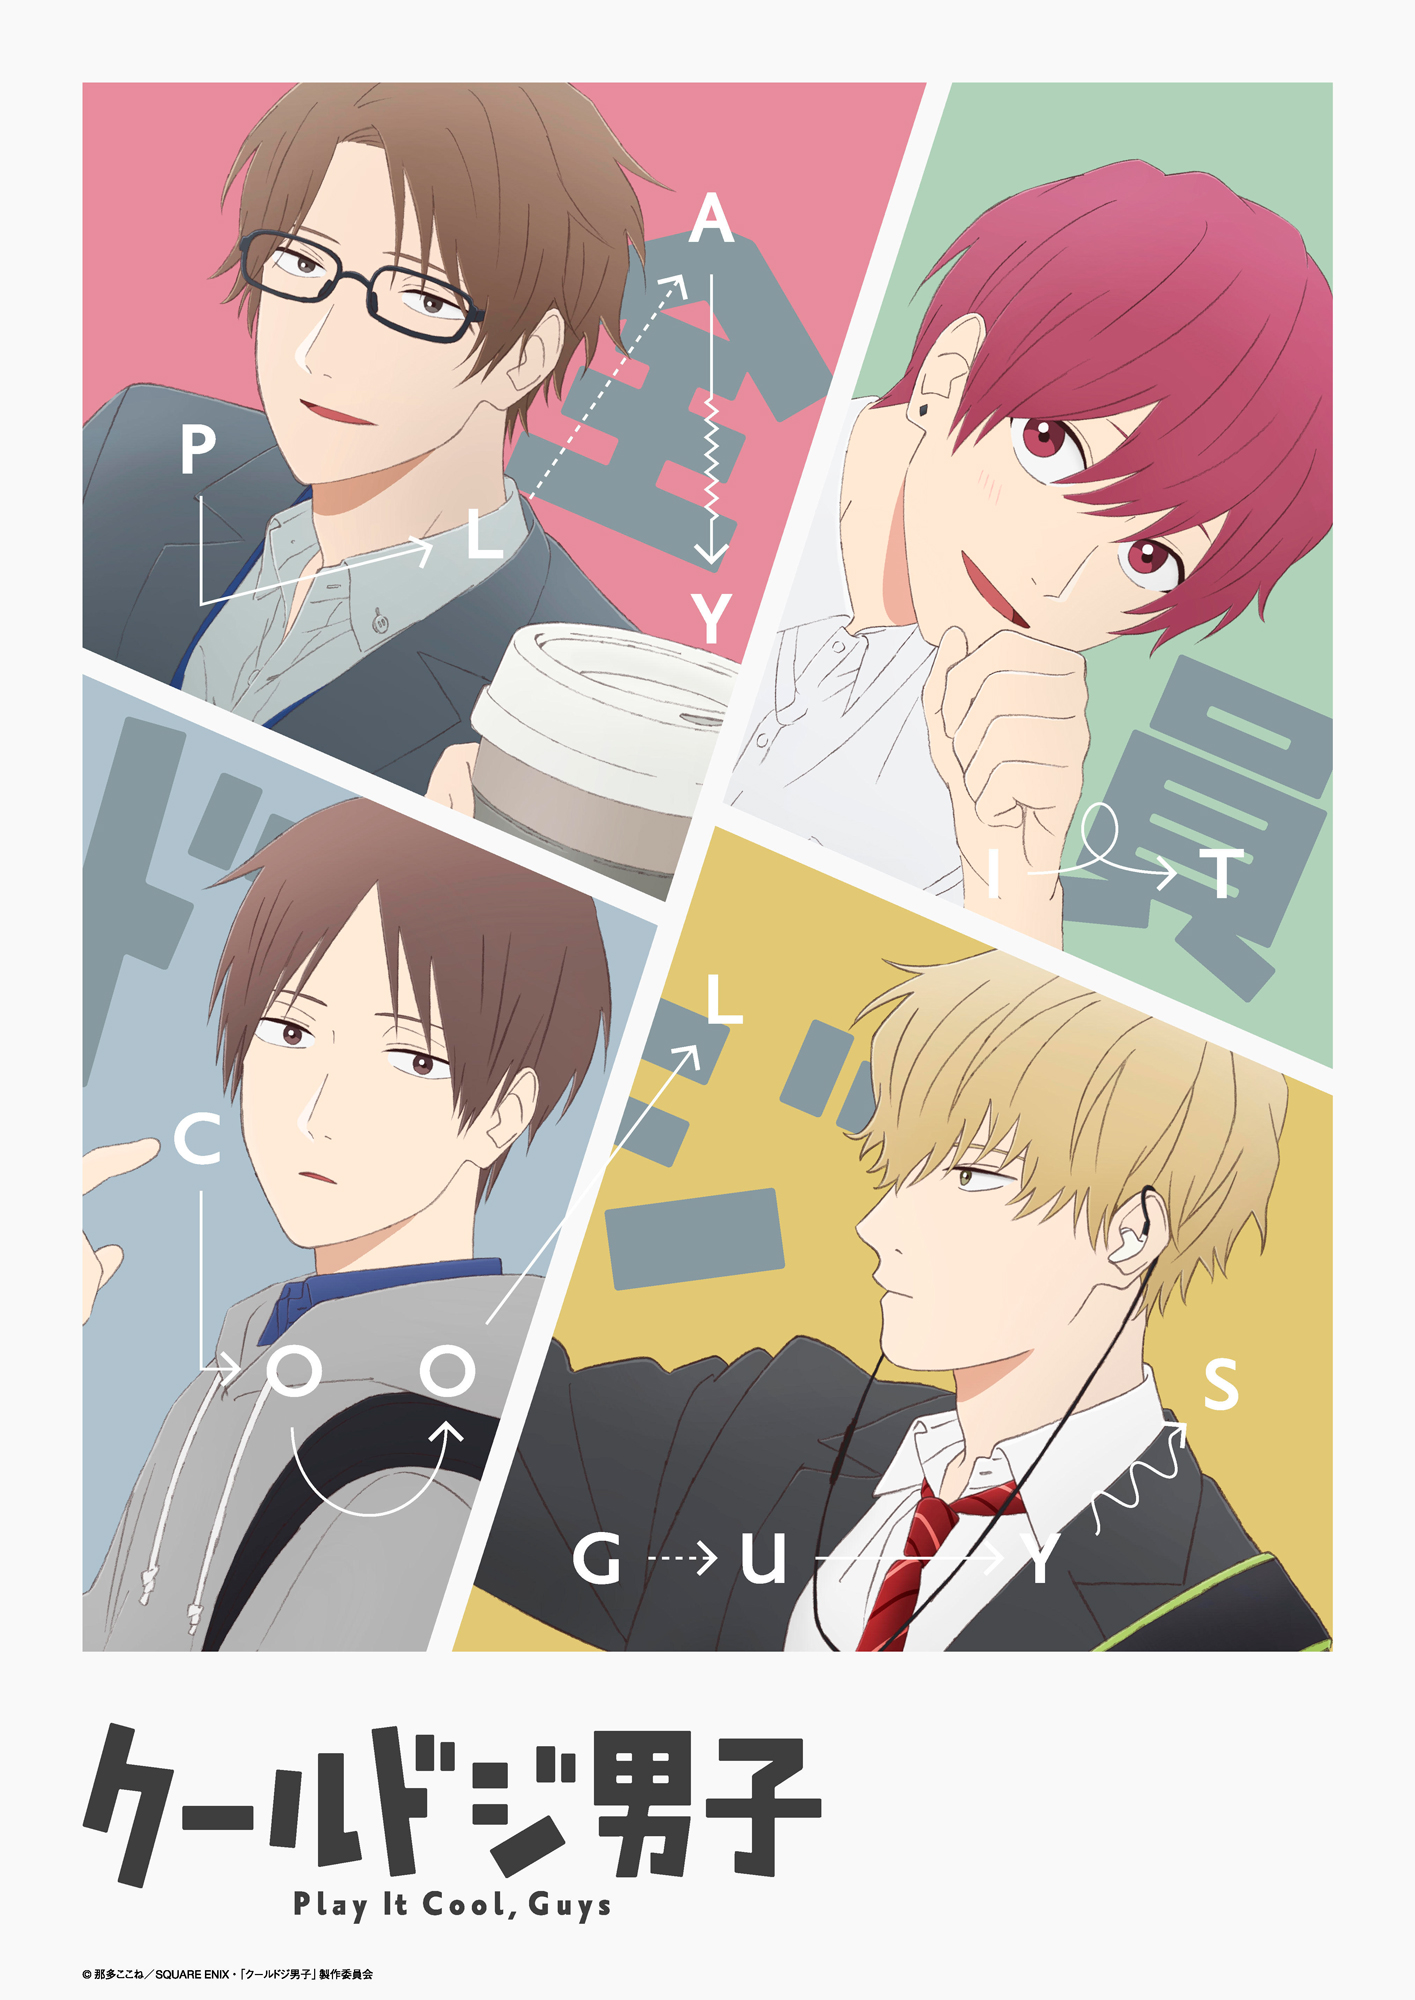 Catch the Cool but Clumsy MCs in October Anime, ‘Play It Cool, Guys’s Promo